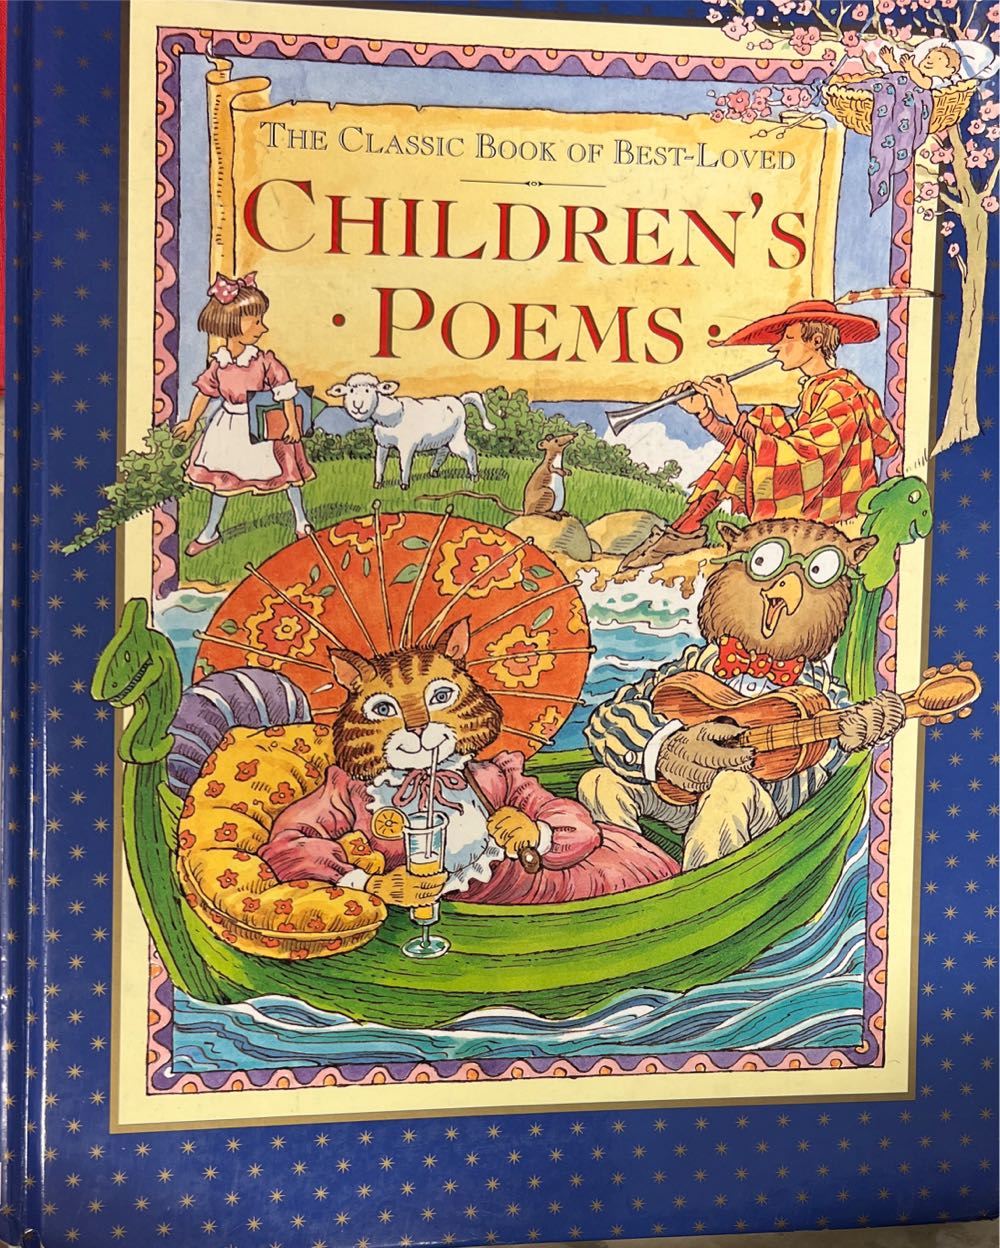 The Classic Book of Best-loved Children’s Poems - Virginia Mattingly book collectible [Barcode 9781858338217] - Main Image 1